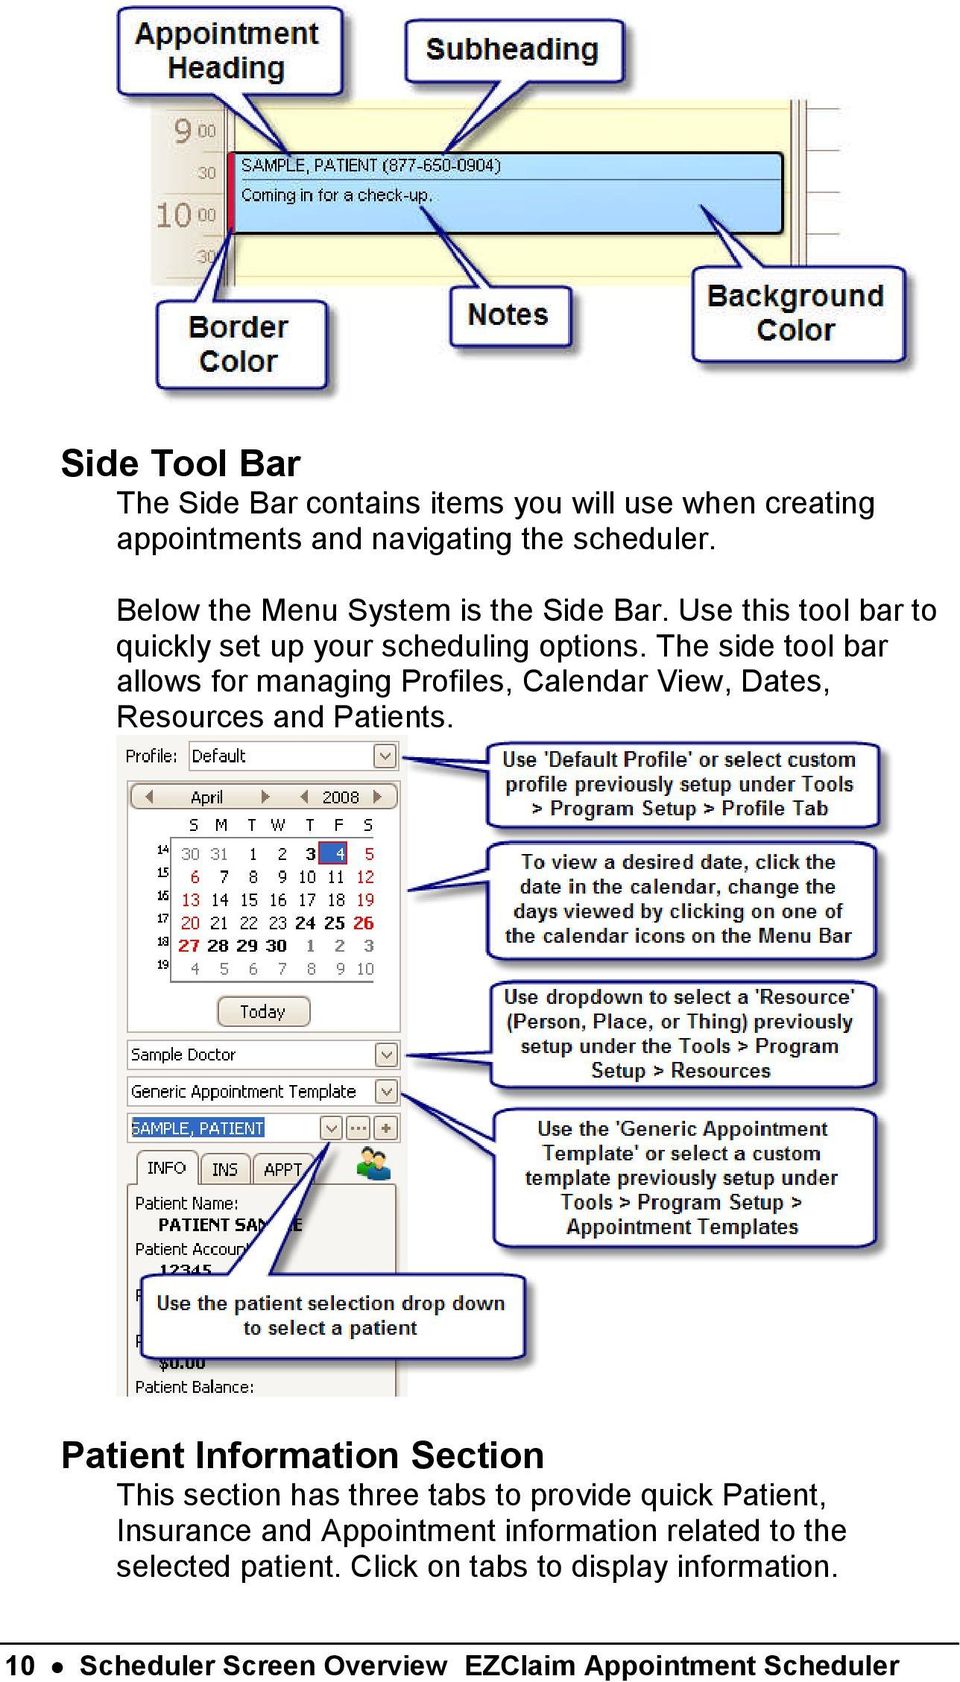 The side tool bar allows for managing Profiles, Calendar View, Dates, Resources and Patients.